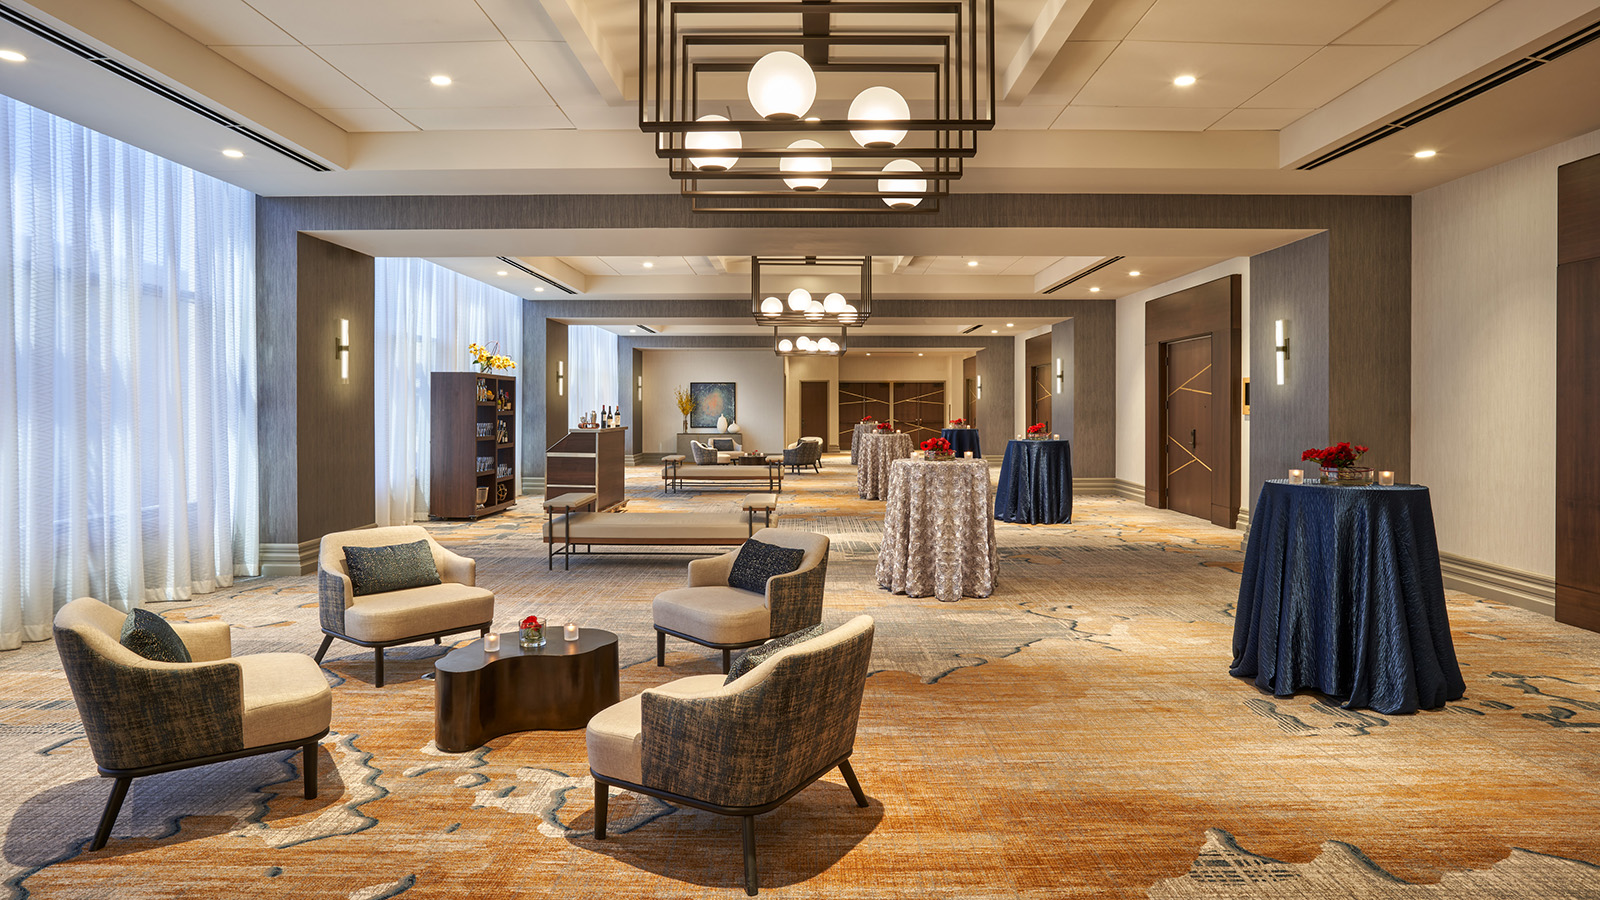 The hotels upgraded meeting and event spaces feature dcor that speaks to the landscape and history of Indianapolis